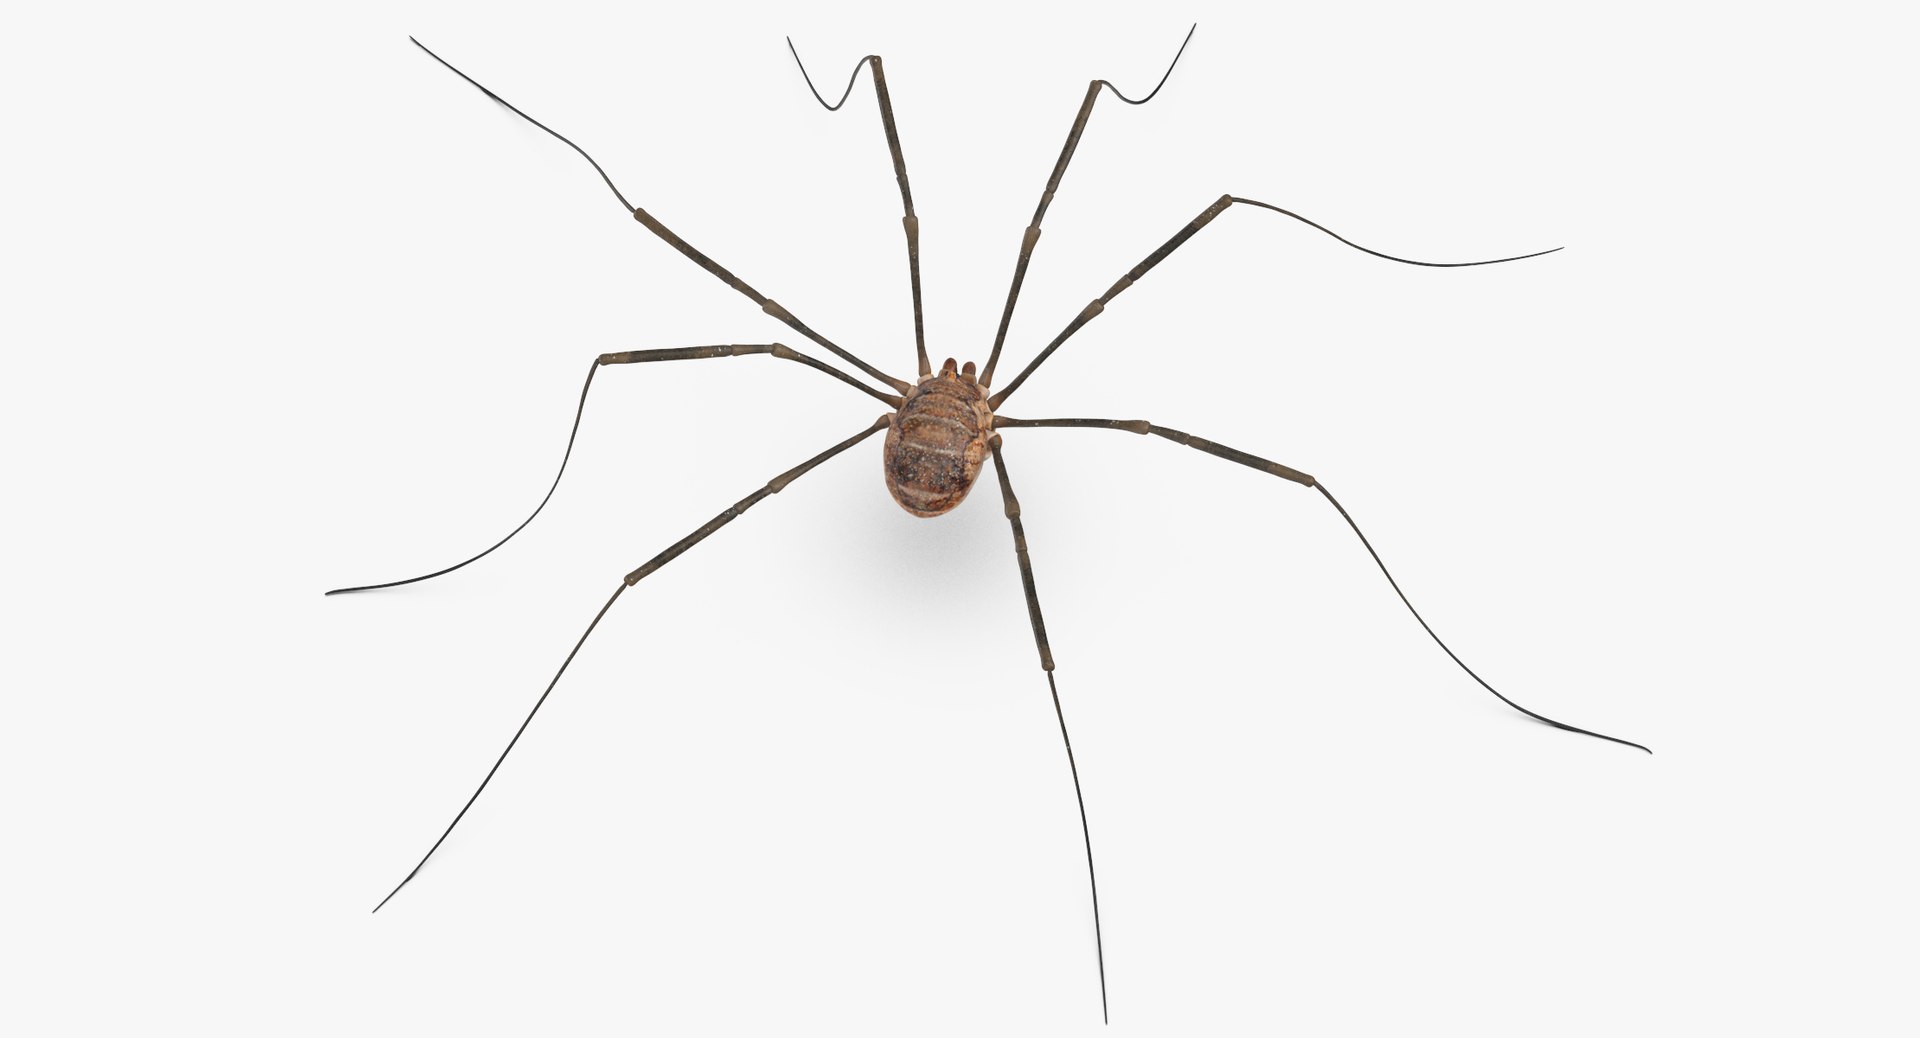 Daddy long legs : r/confusingperspective